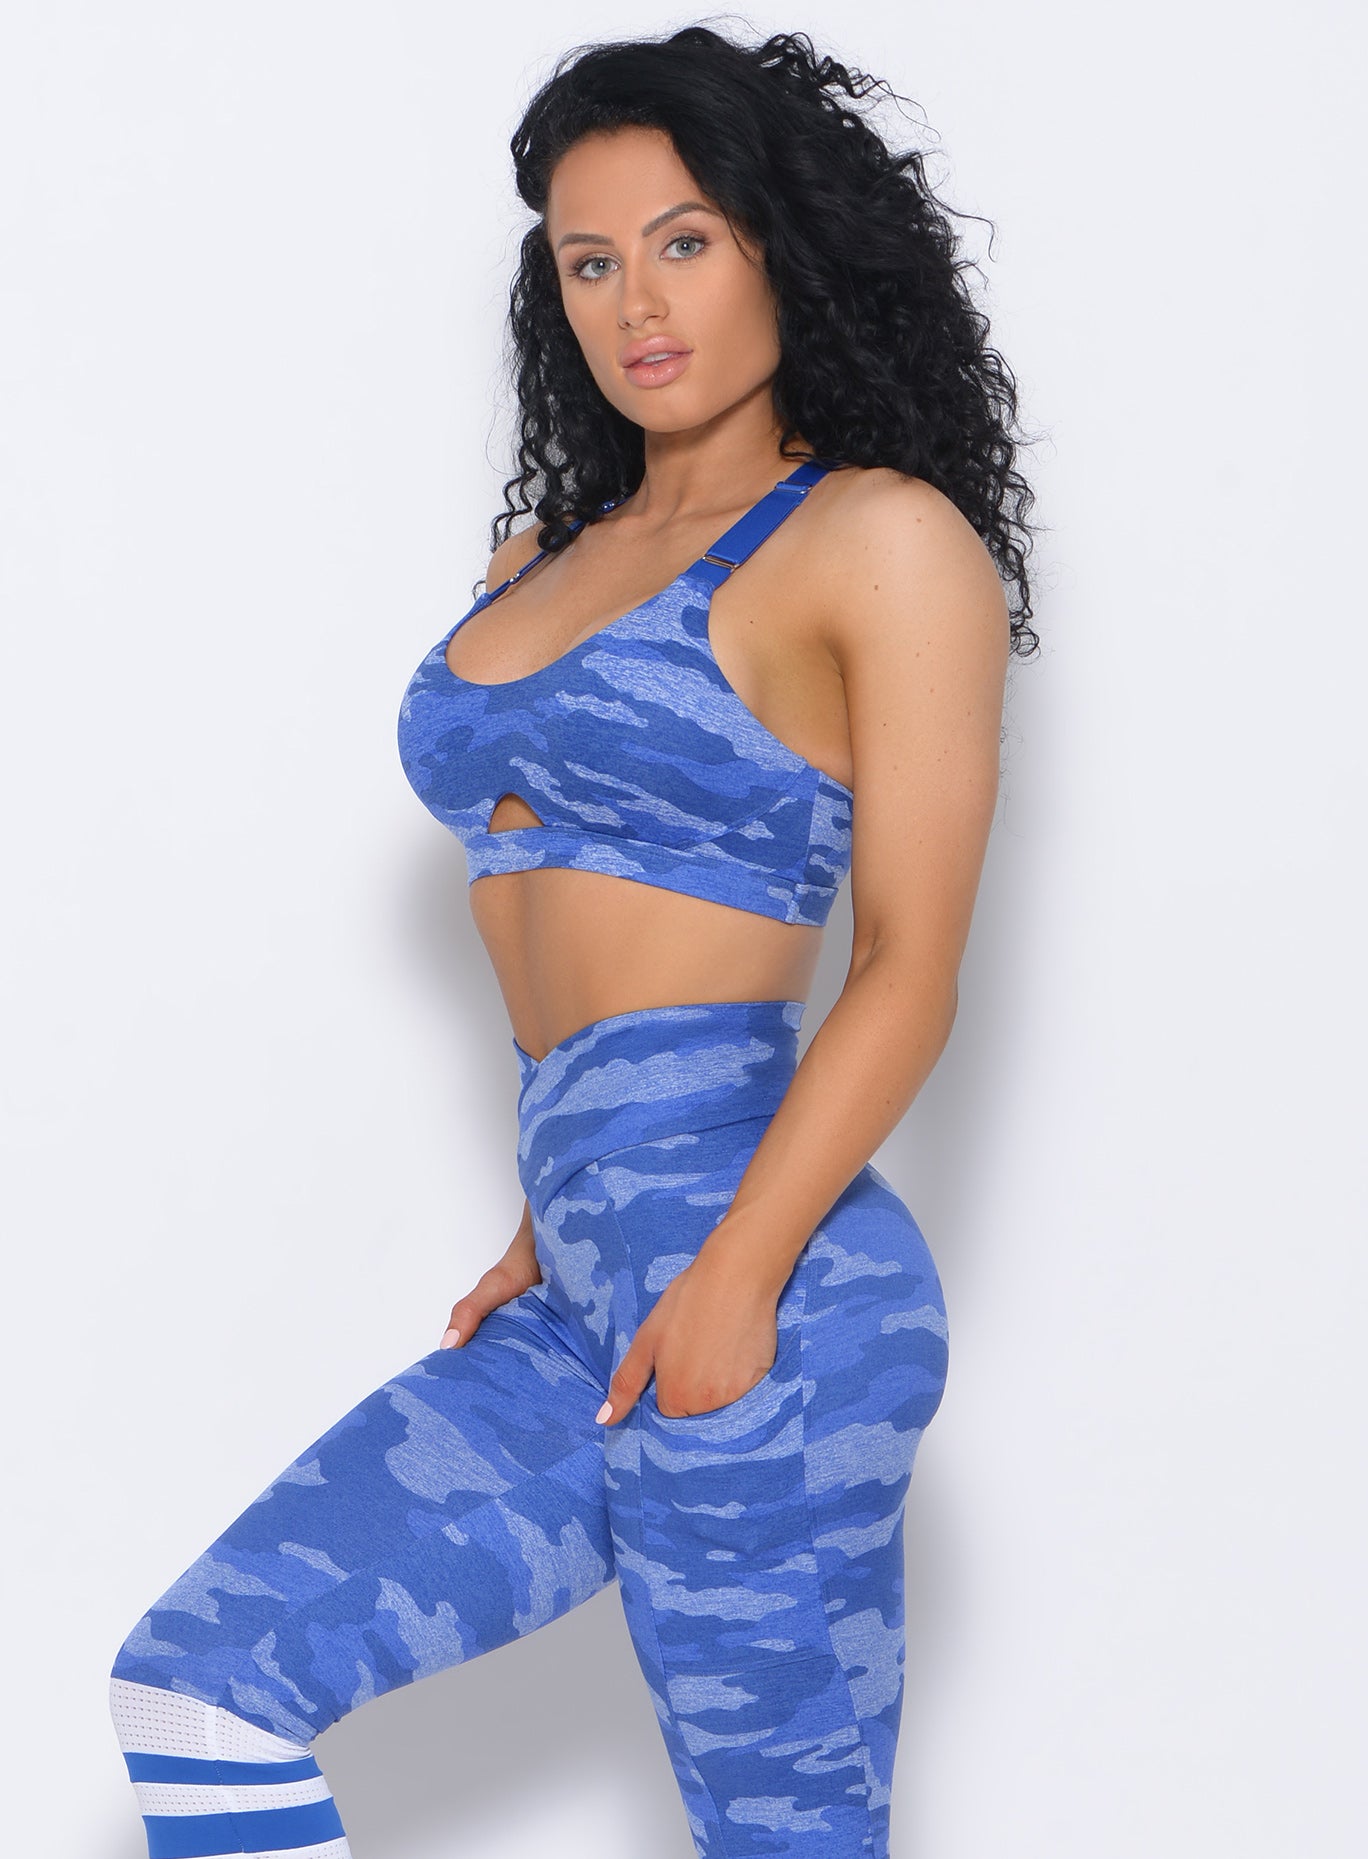 Left side view of the model wearing our blue fit camo sports bra and a matching leggings